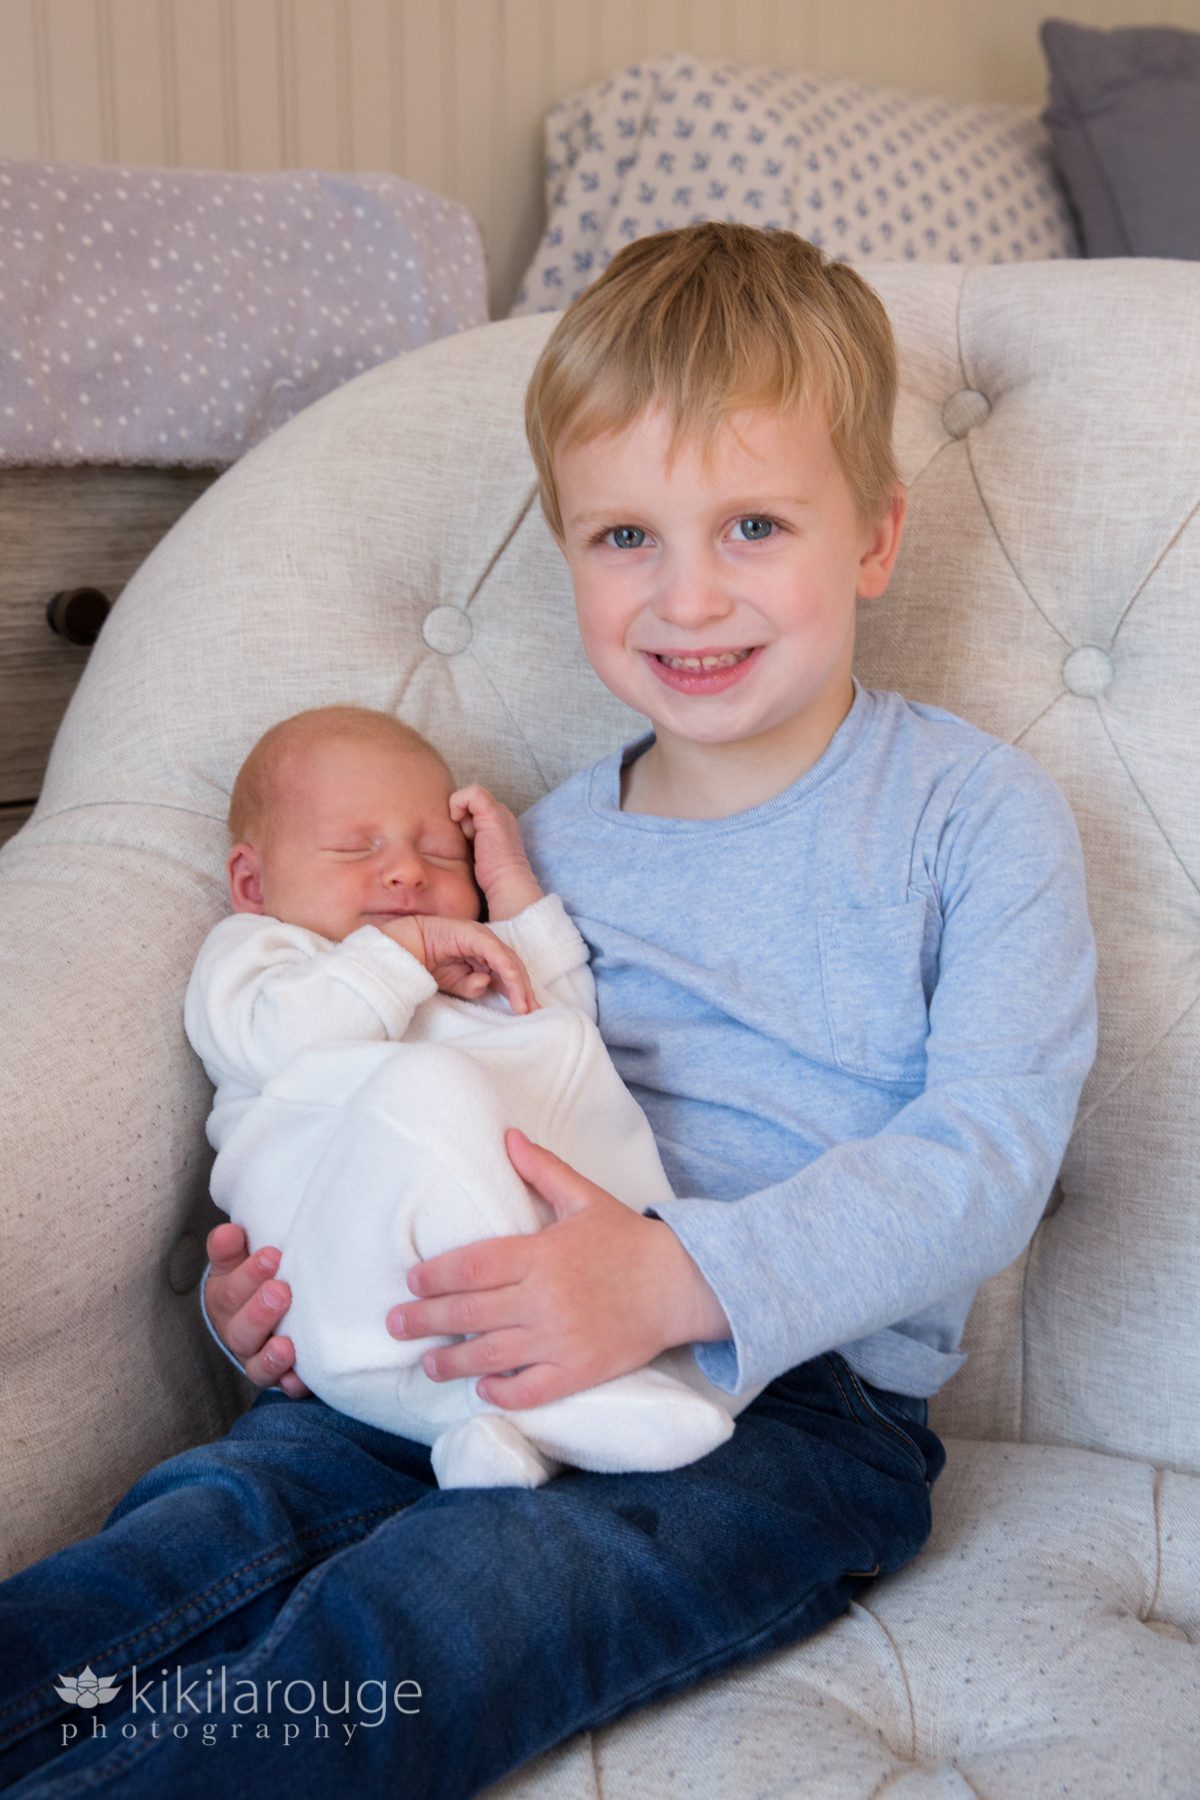 Young boy blonde hair holding his newborn baby sister in big chair